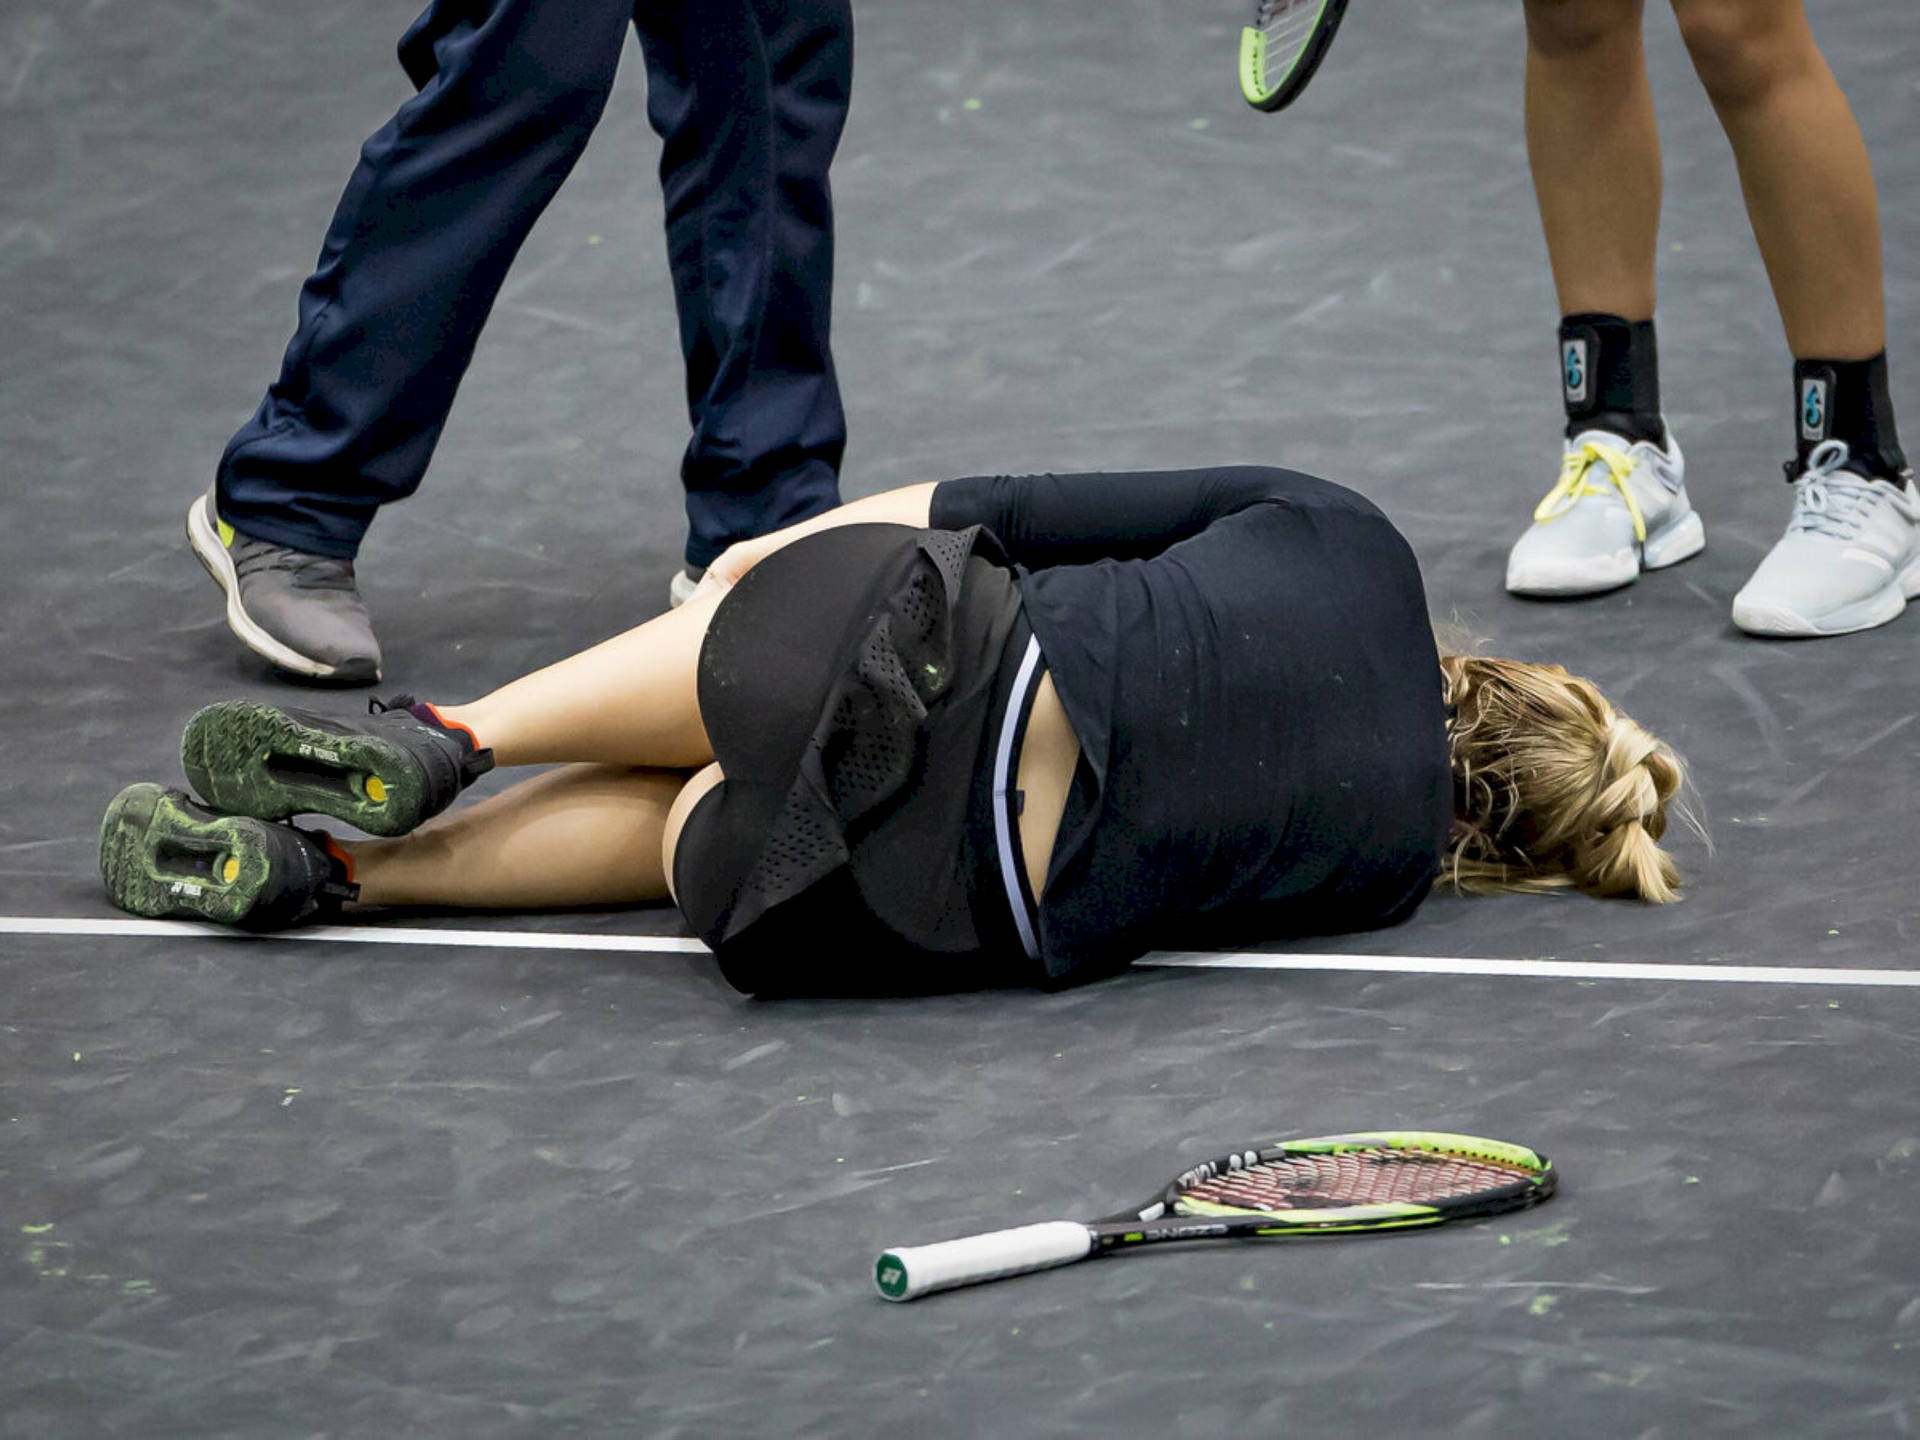 Sabine Lisicki Experiencing An Injury on the Court Wallpaper